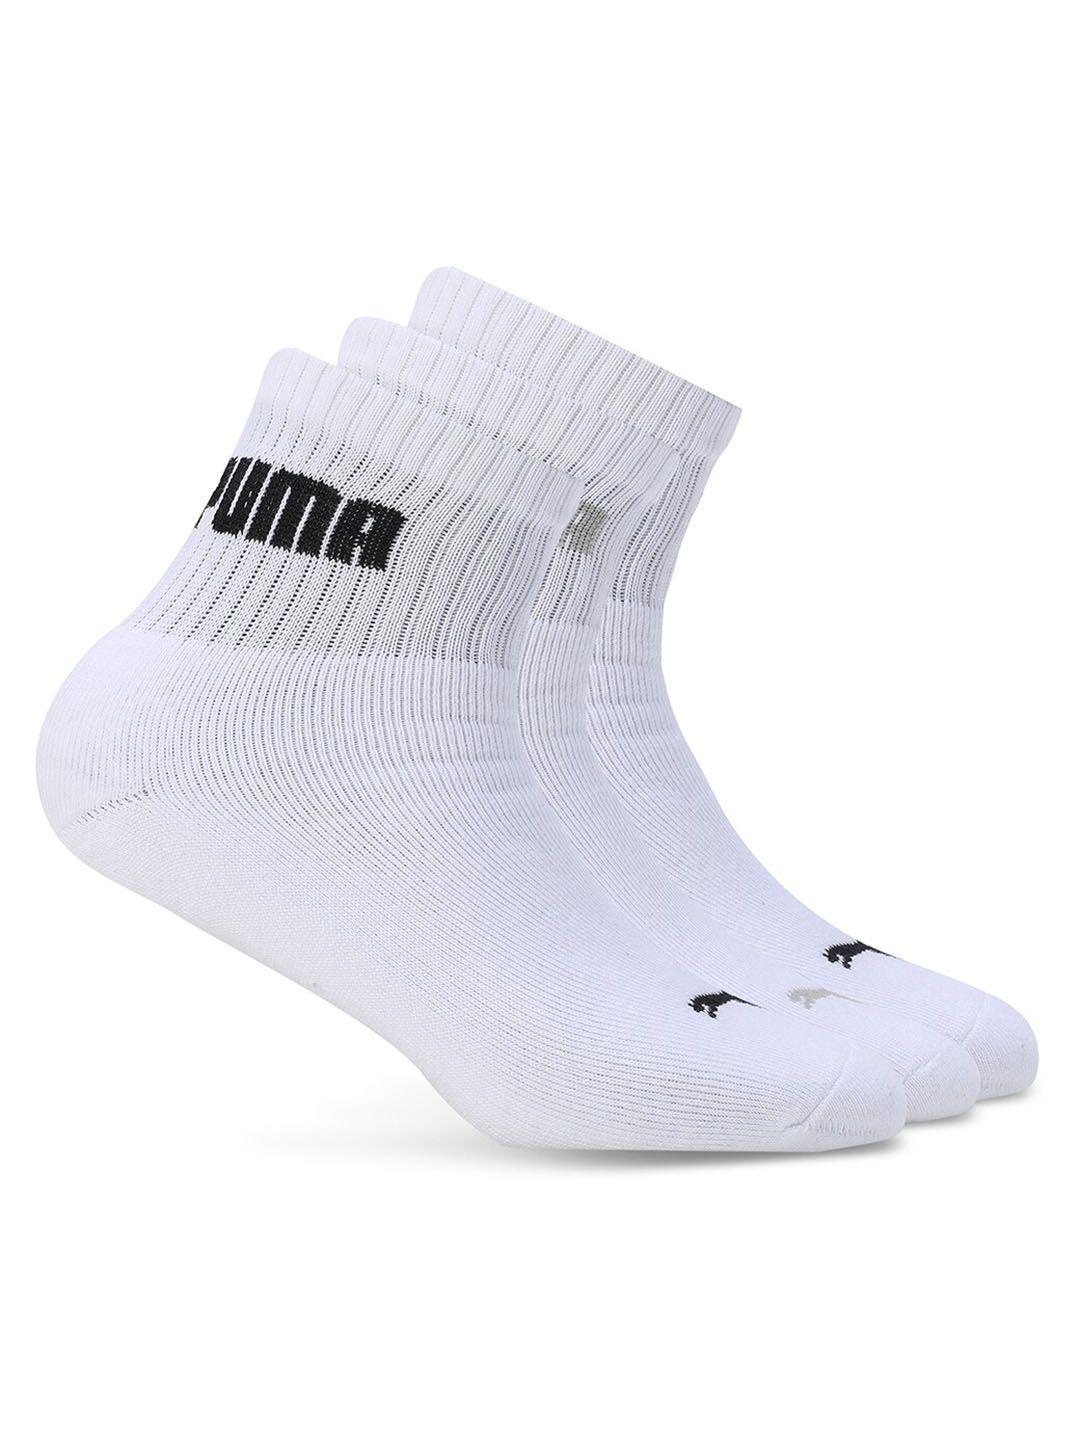 puma unisex pack of 3 printed cotton above ankle-length socks